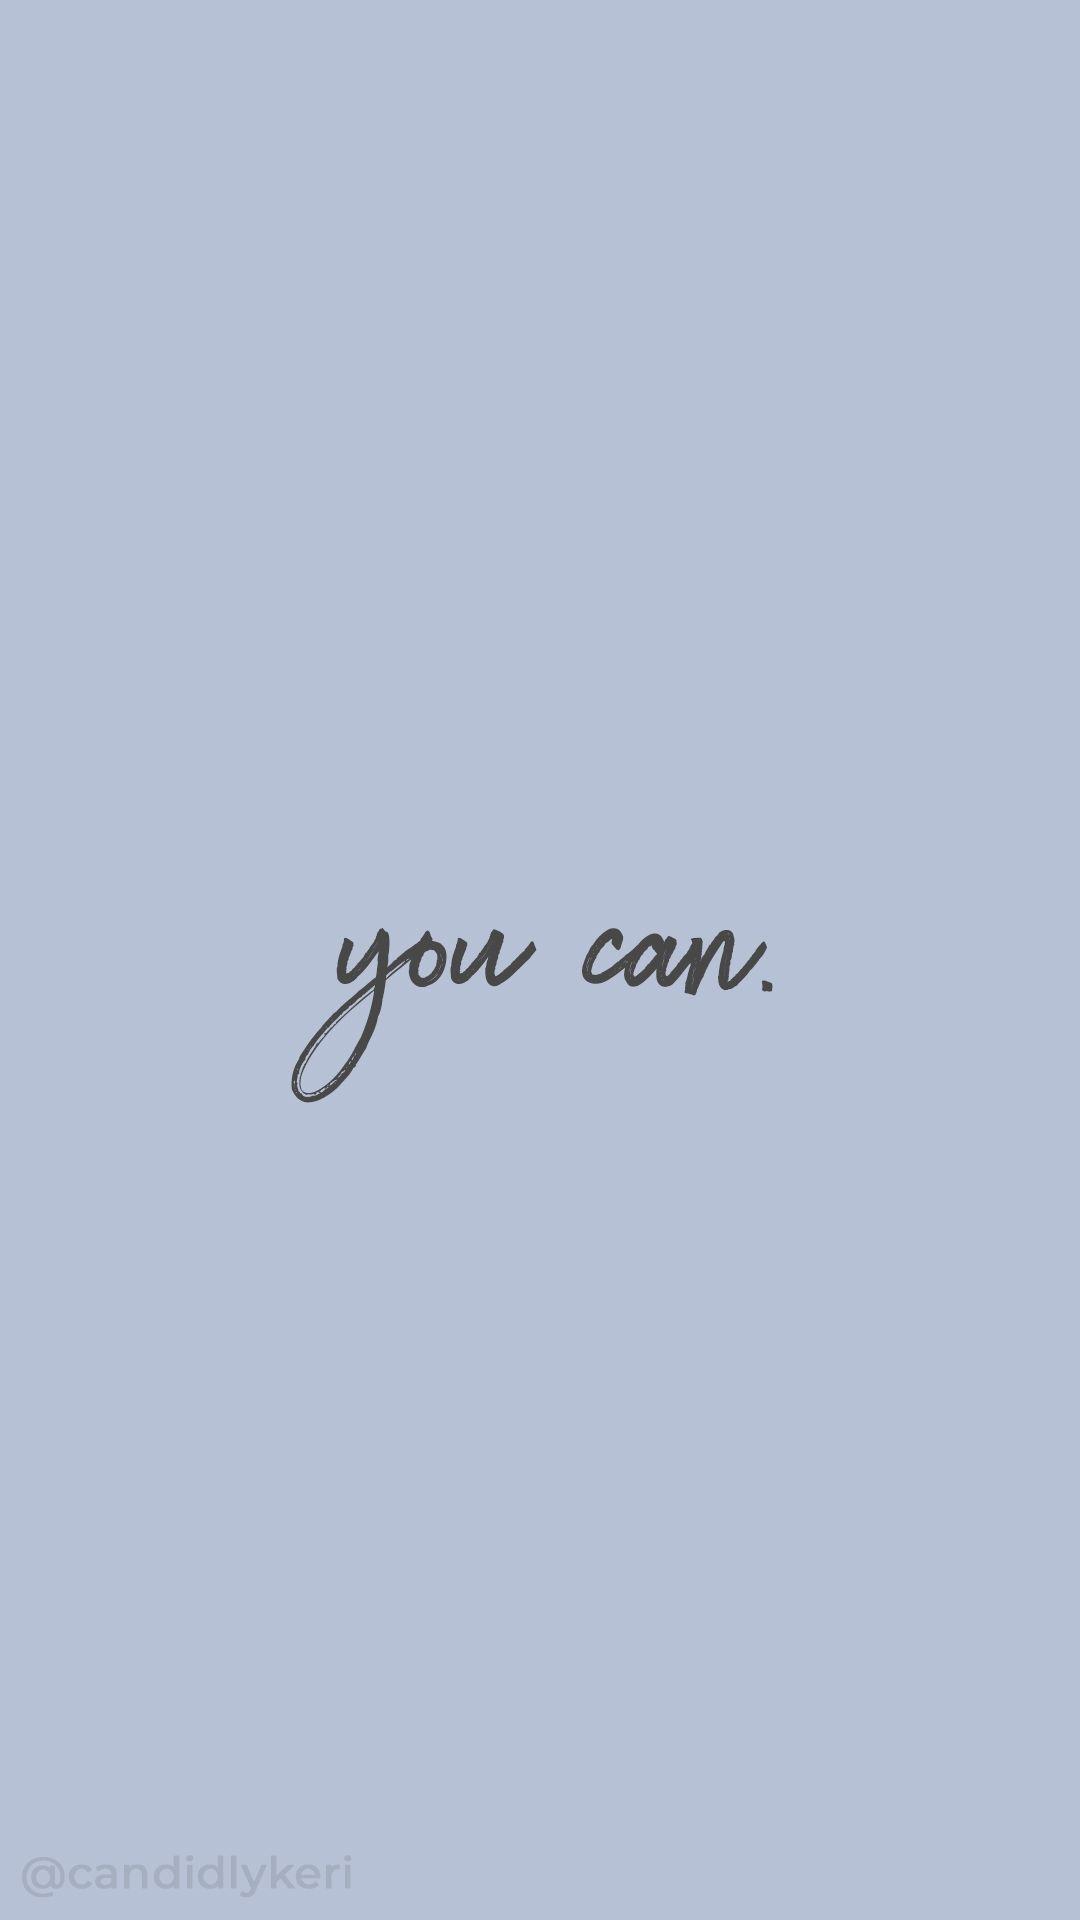 Yes You Can Wallpapers - Wallpaper Cave